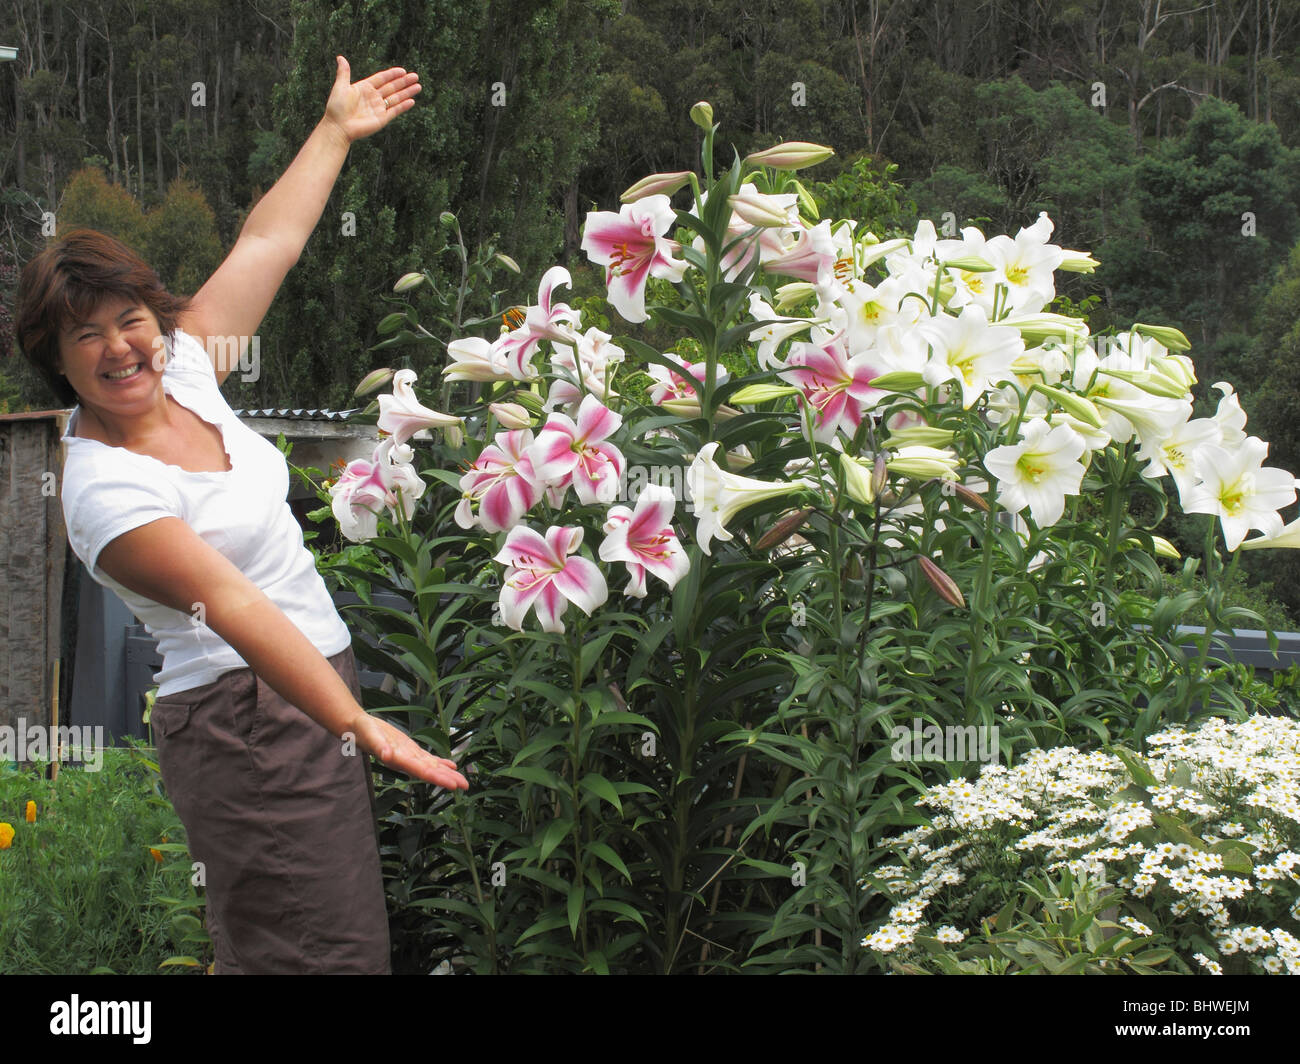 Woman proudly showing off her display of varied lilies in her garden Stock Photo